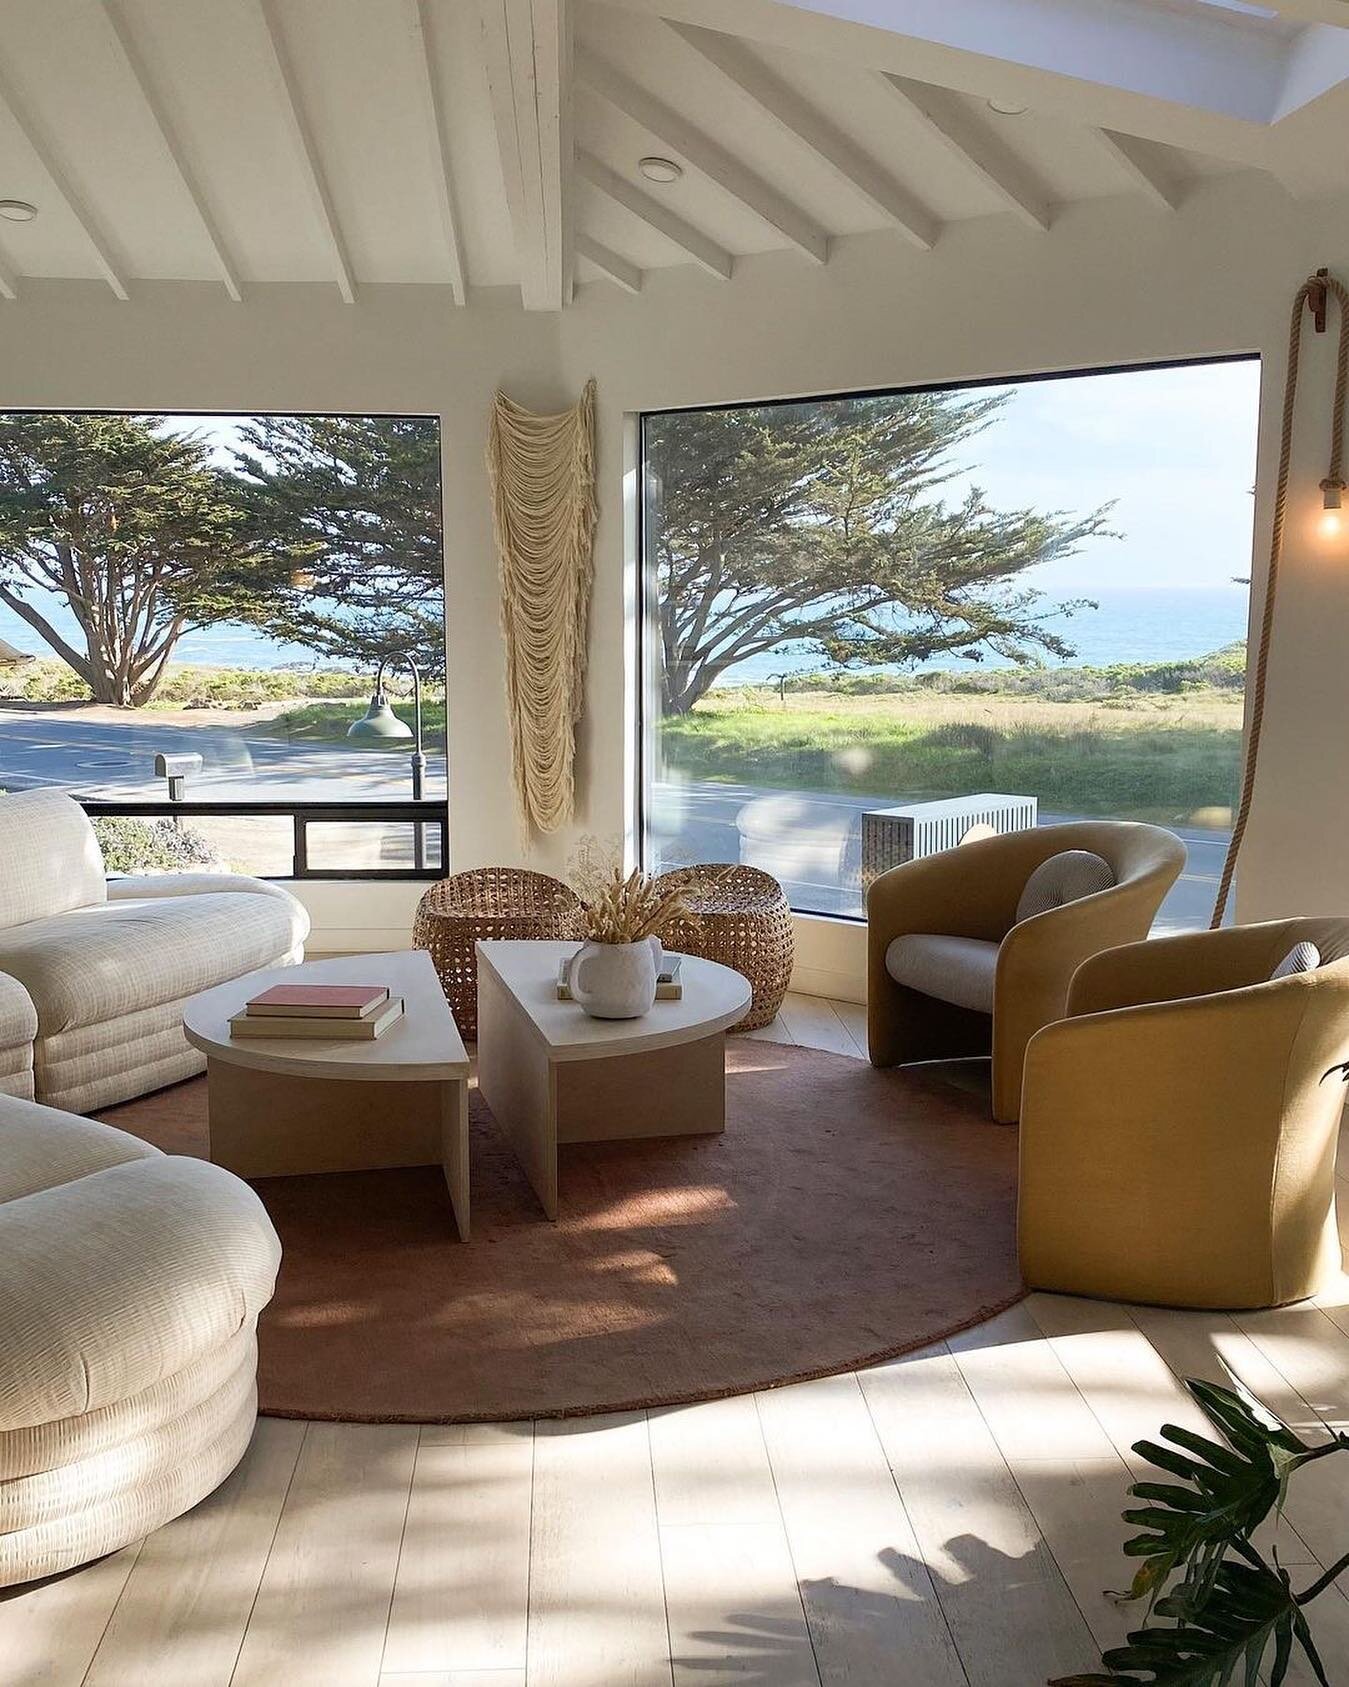 Cambria is a seaside village in San Luis Obispo County that is heating up this summer with the opening of the first luxury boutique hotel on Cambria&rsquo;s Moonstone Beach @whitewatercambria #VisitCambria #VisitCalifornia

Photo @lindsenglander
.
.
